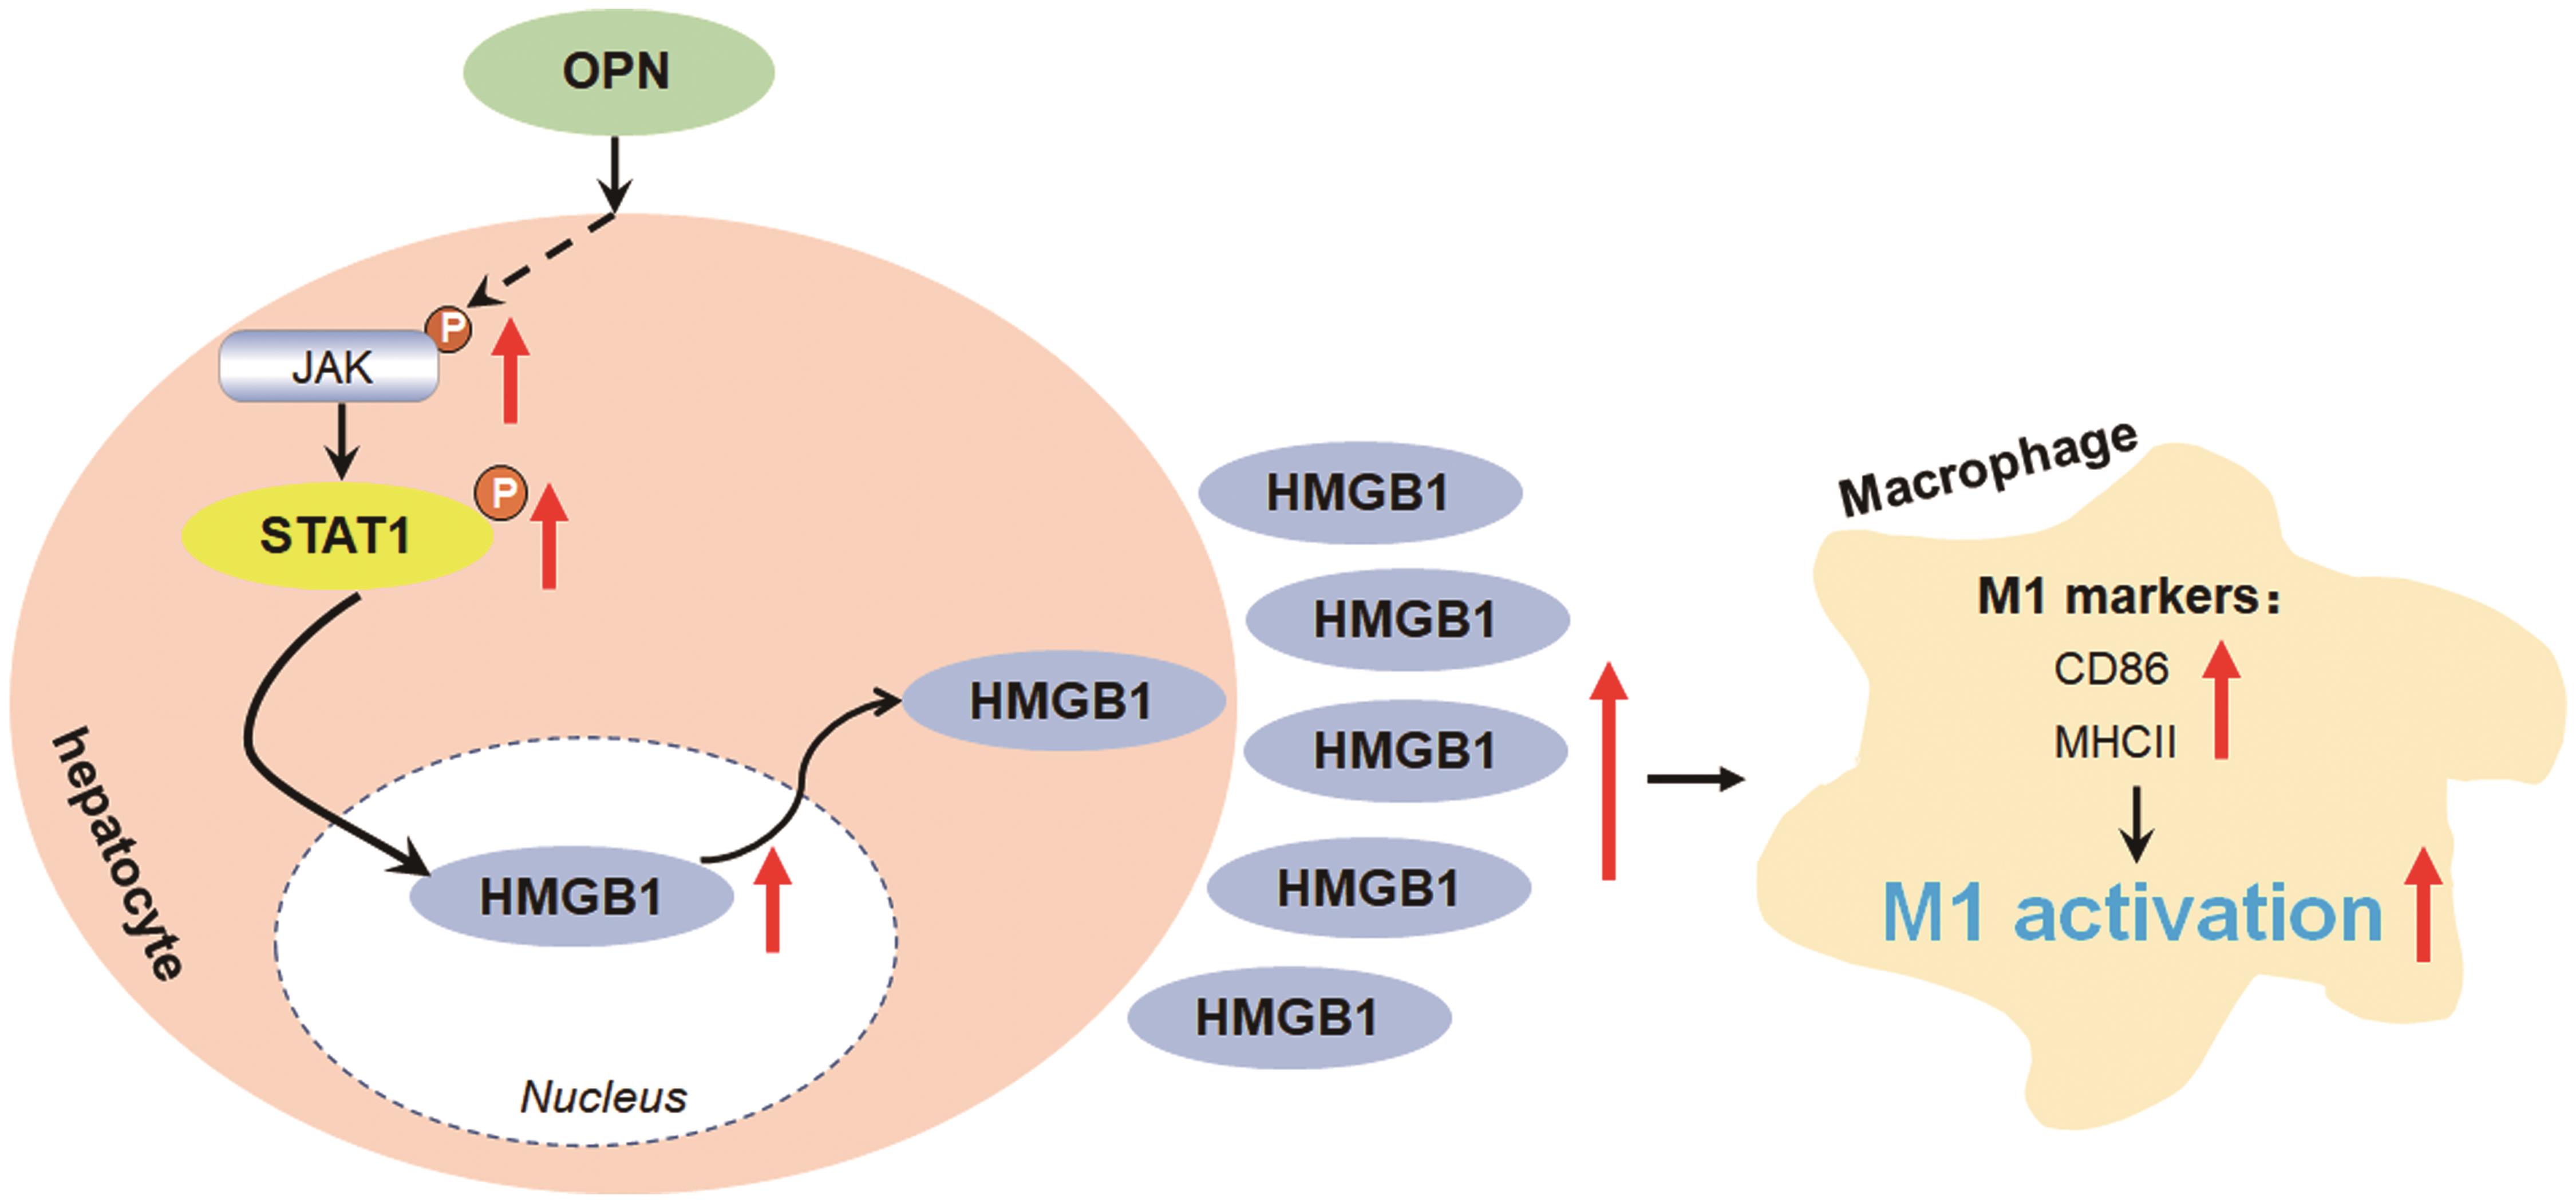 A depiction of the signaling pathway by which OPN promotes macrophage M1 polarization.